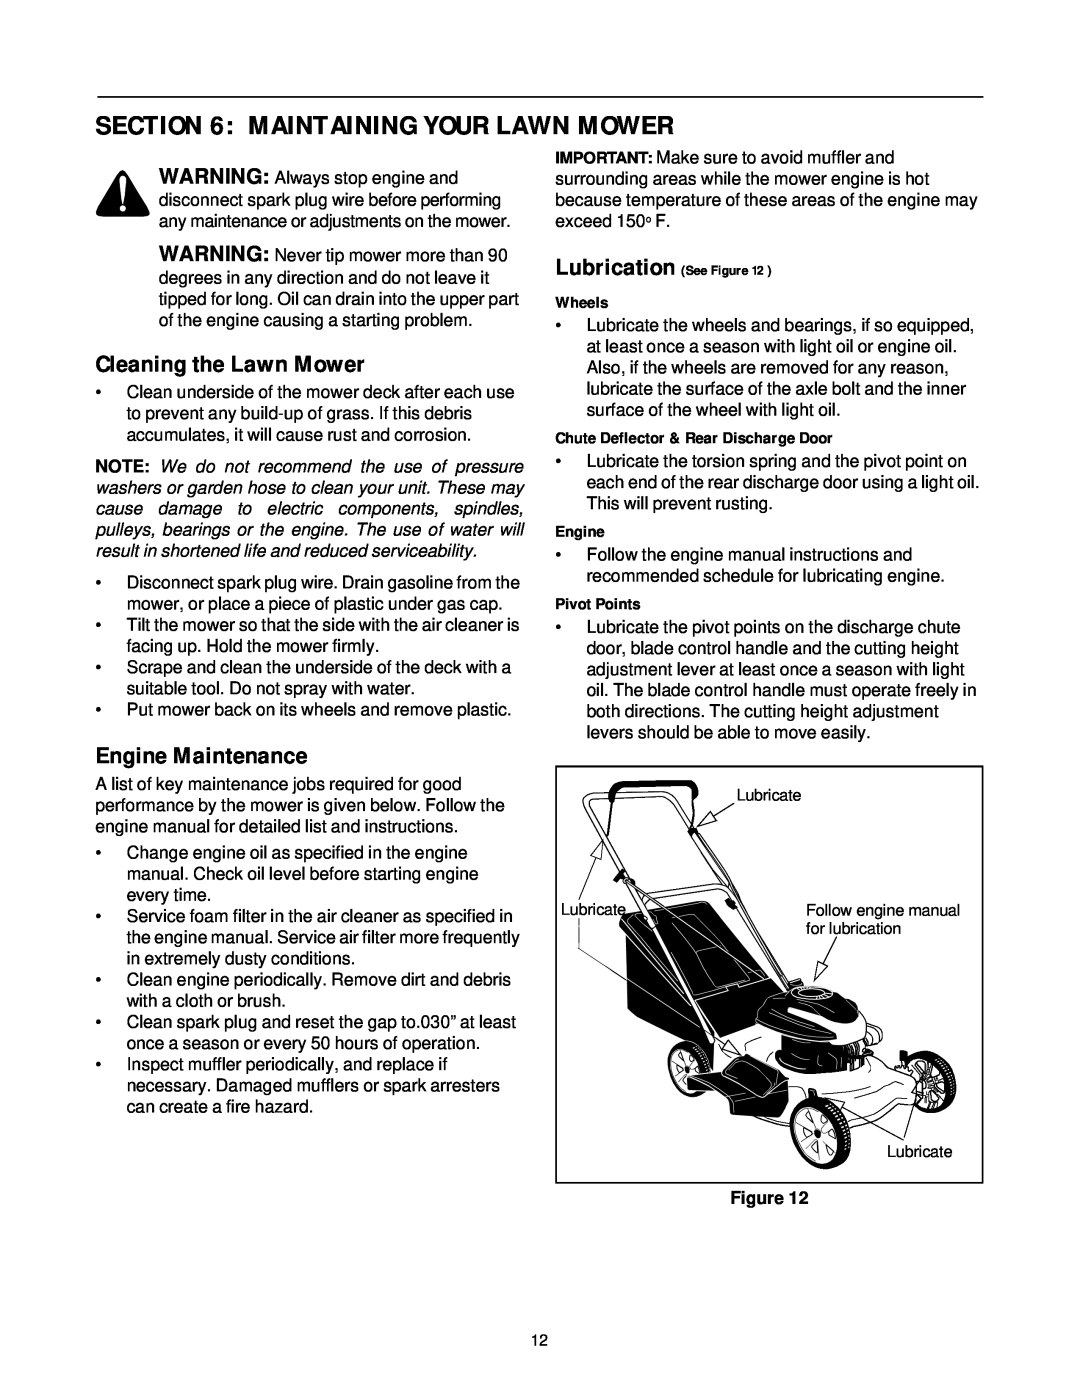 Yard-Man 437 manual Maintaining Your Lawn Mower, Cleaning the Lawn Mower, Engine Maintenance, Wheels, Pivot Points 